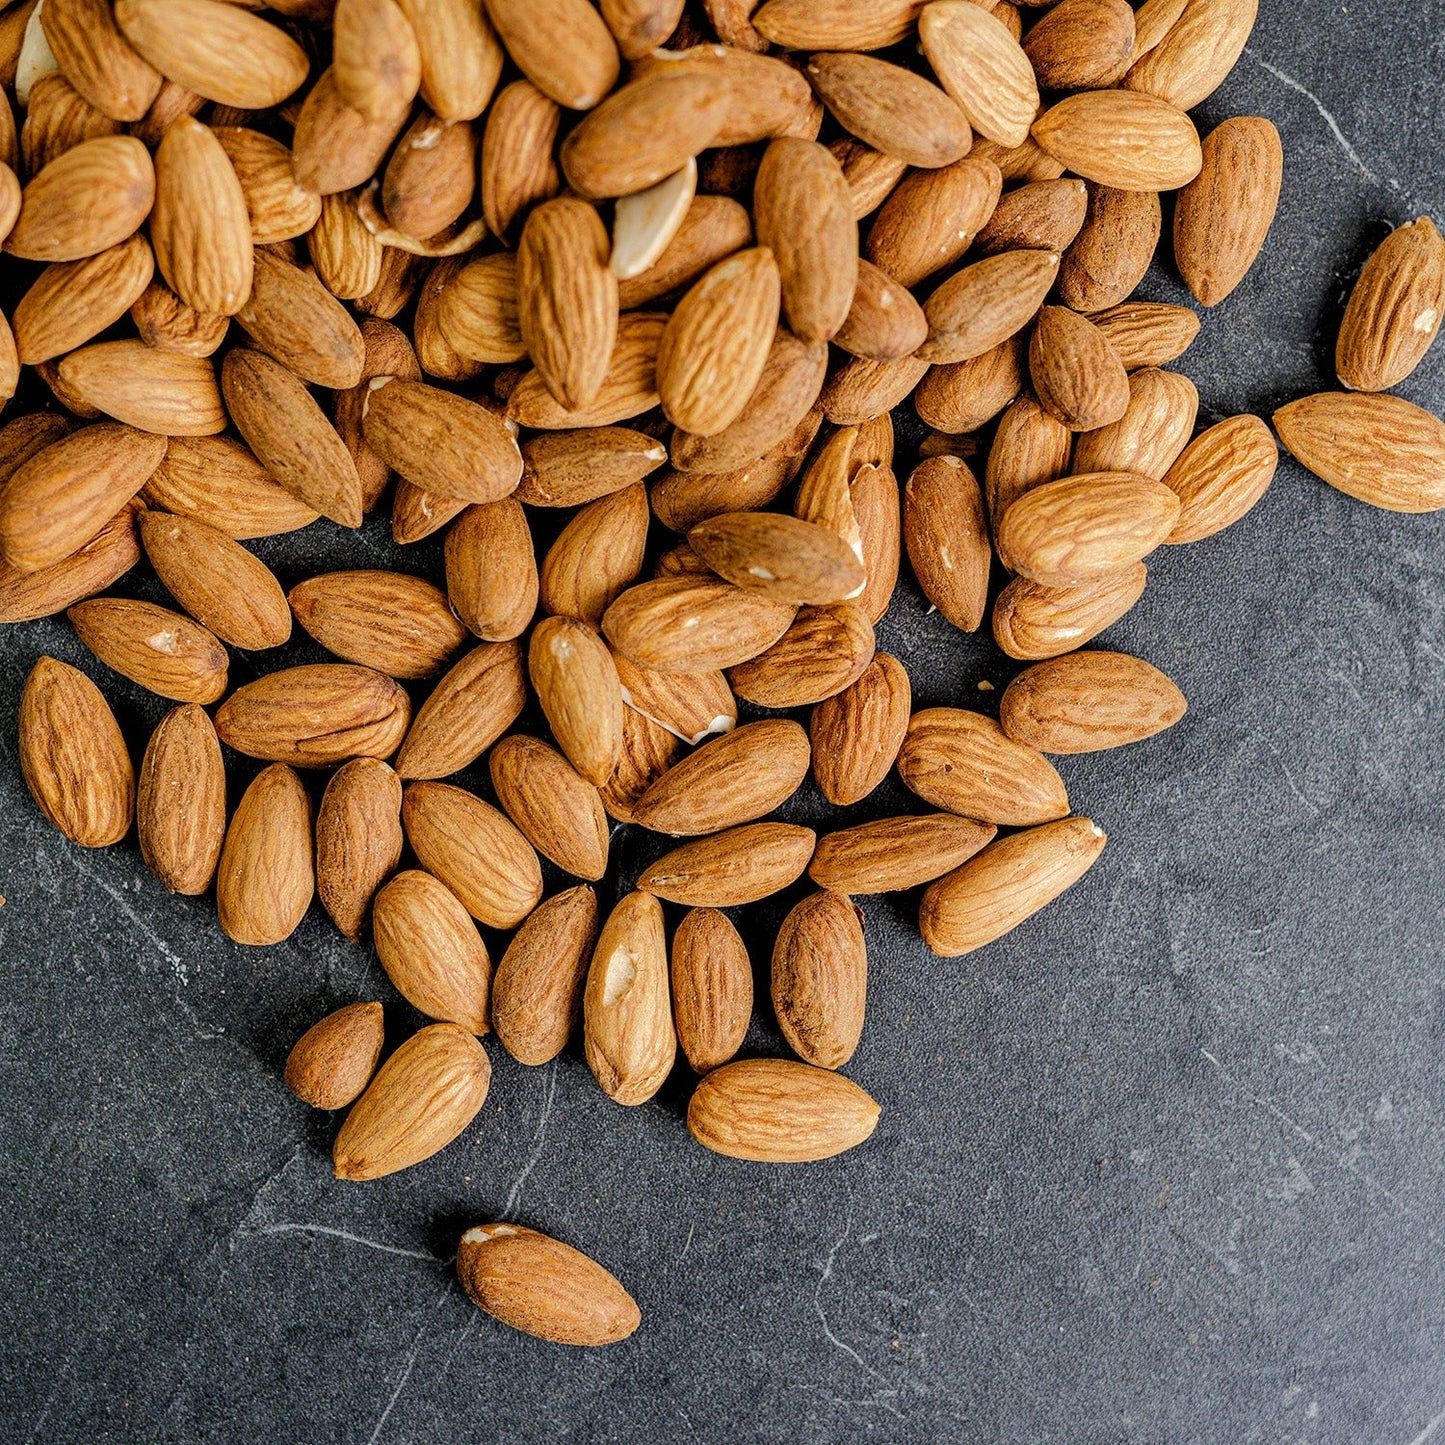 Crispy Sprouted Organic Almonds by Dr. Cowan's Garden